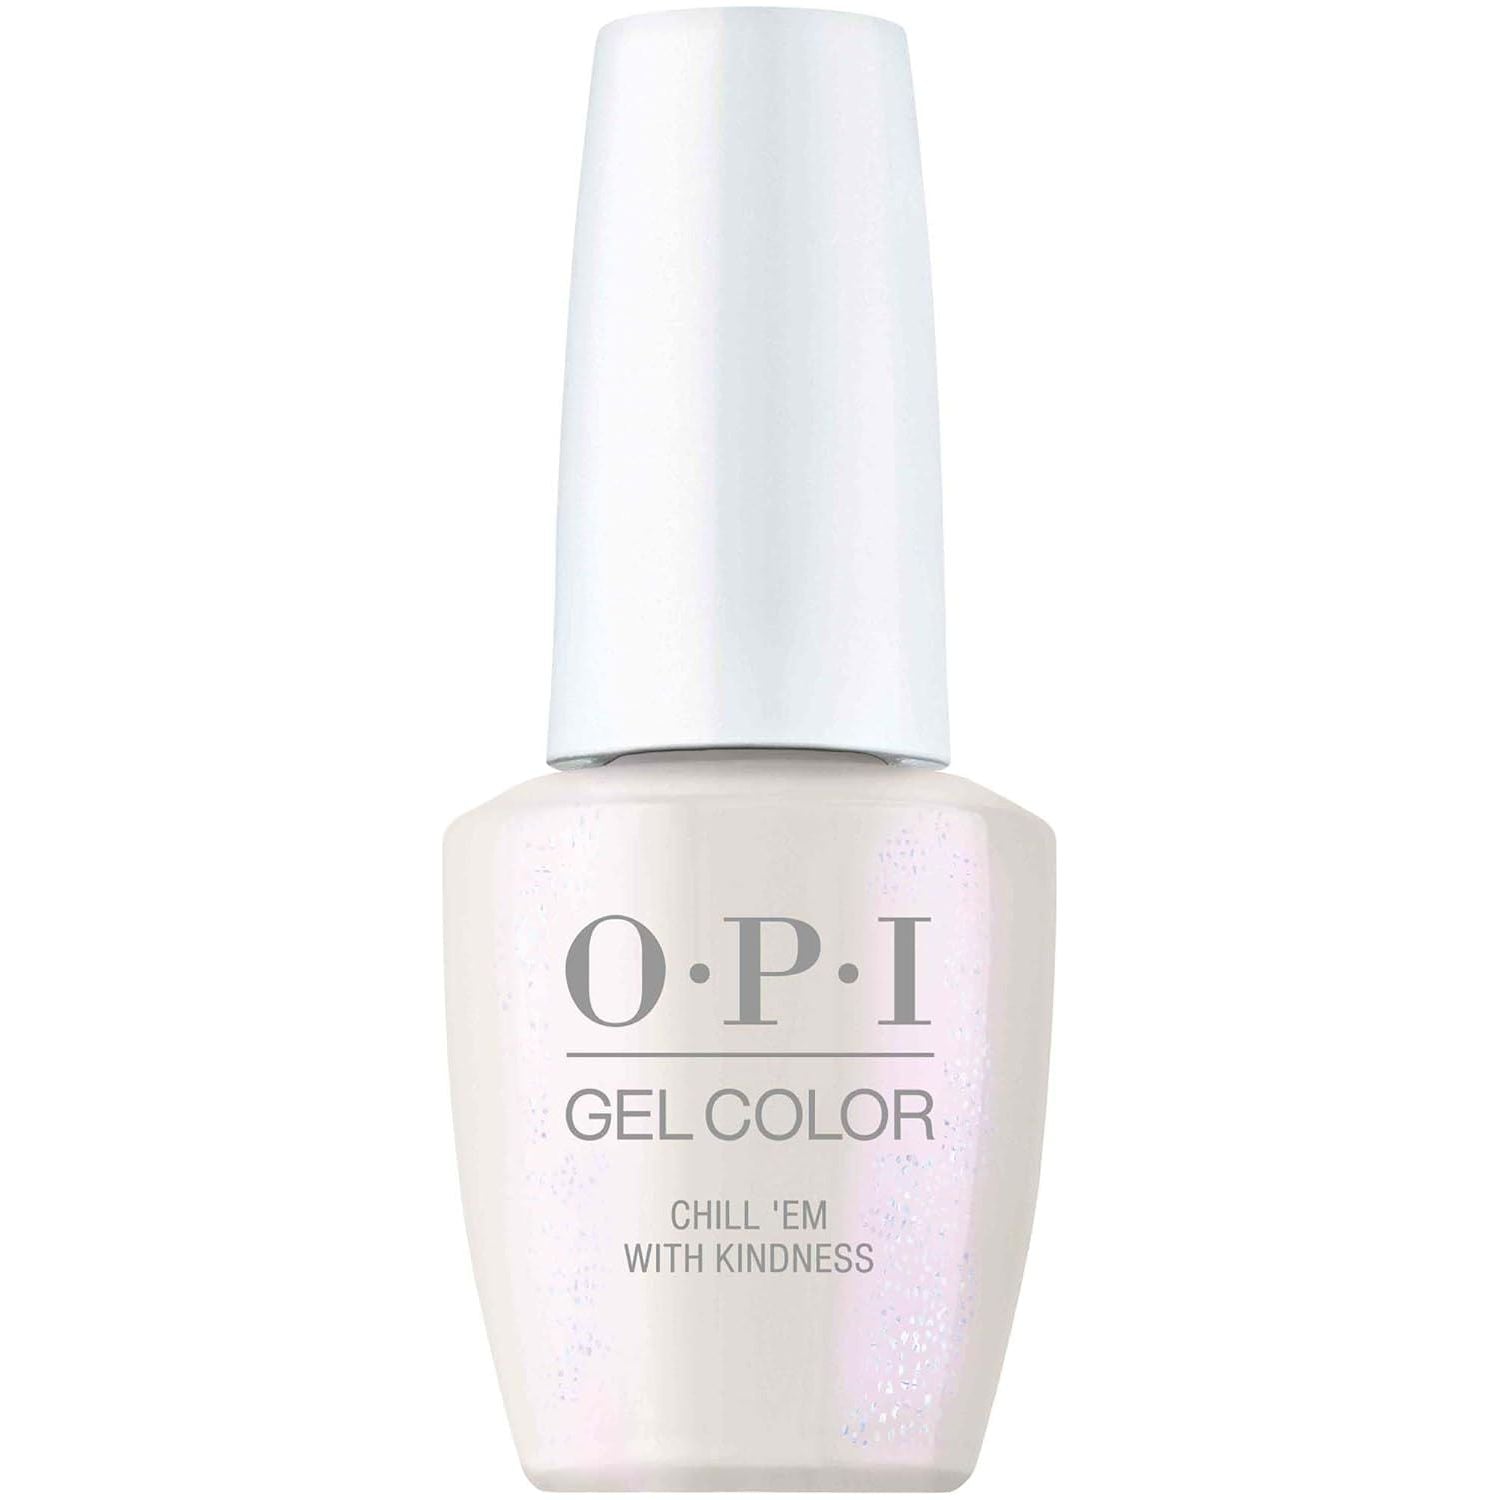 OPI GelColor Chill 'Em With Kindness HPQ07 | Universal Nail Supplies